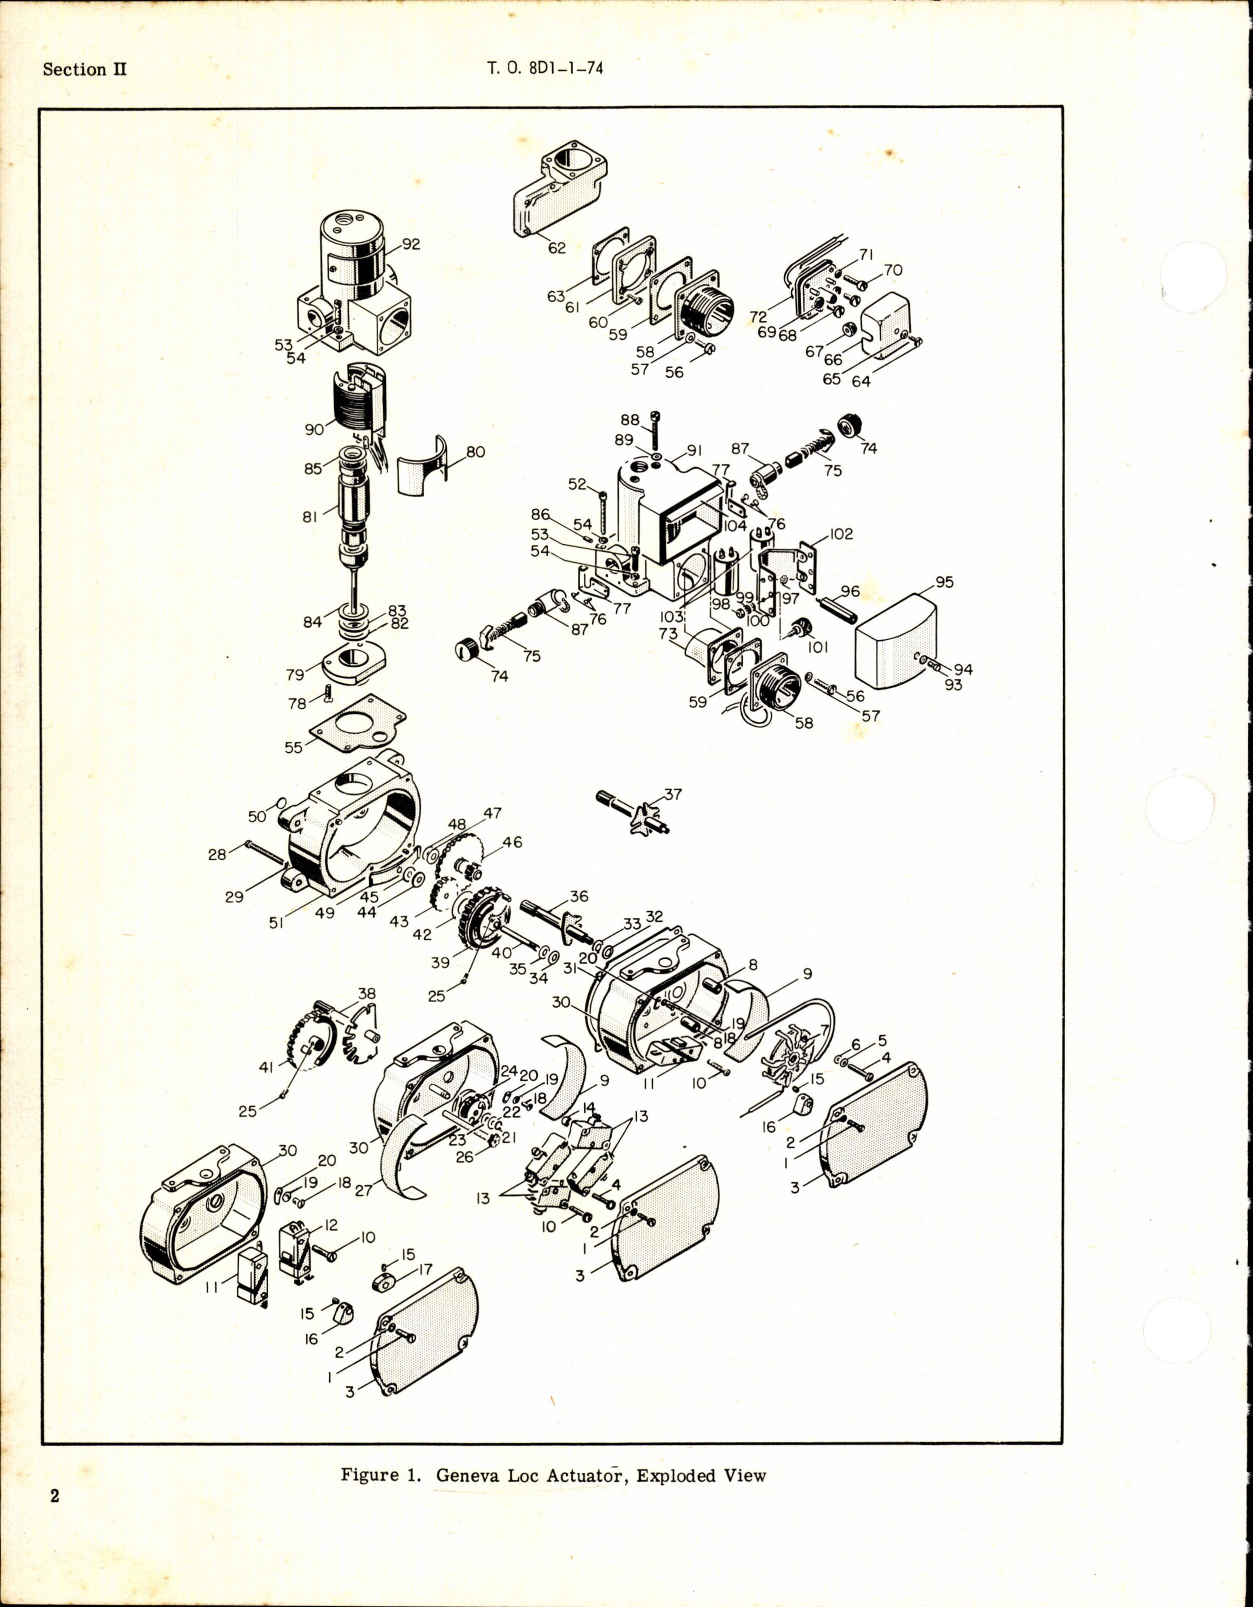 Sample page 4 from AirCorps Library document: Parts Catalog for Geneva Loc Actuators